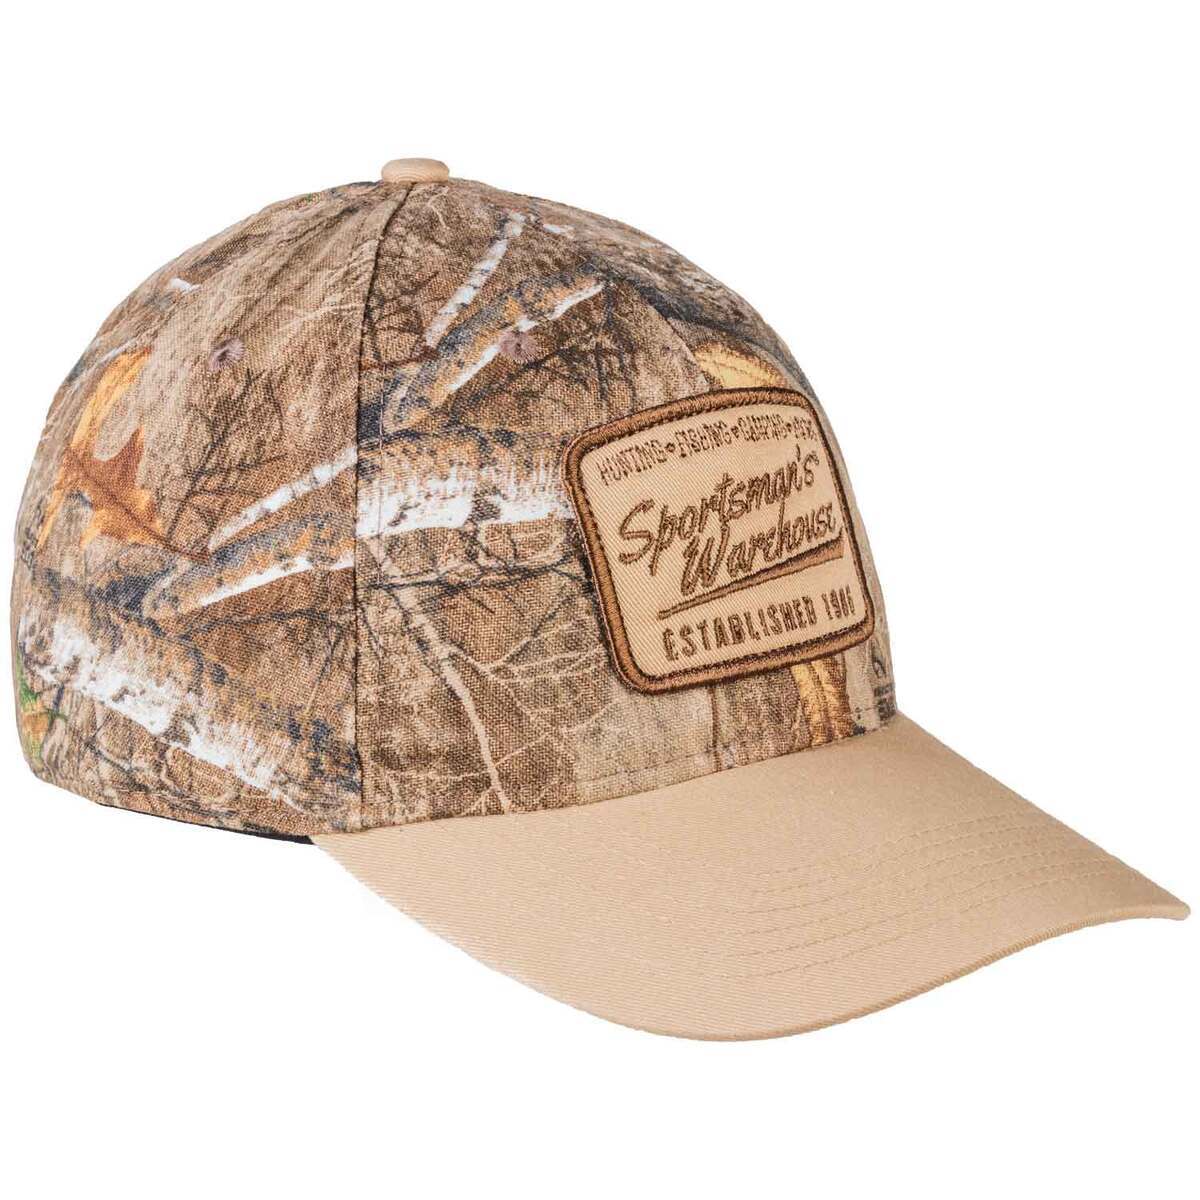 Sportsman's Warehouse Men's Realtree Edge Adjustable Hat - Camo One Size Fits Most